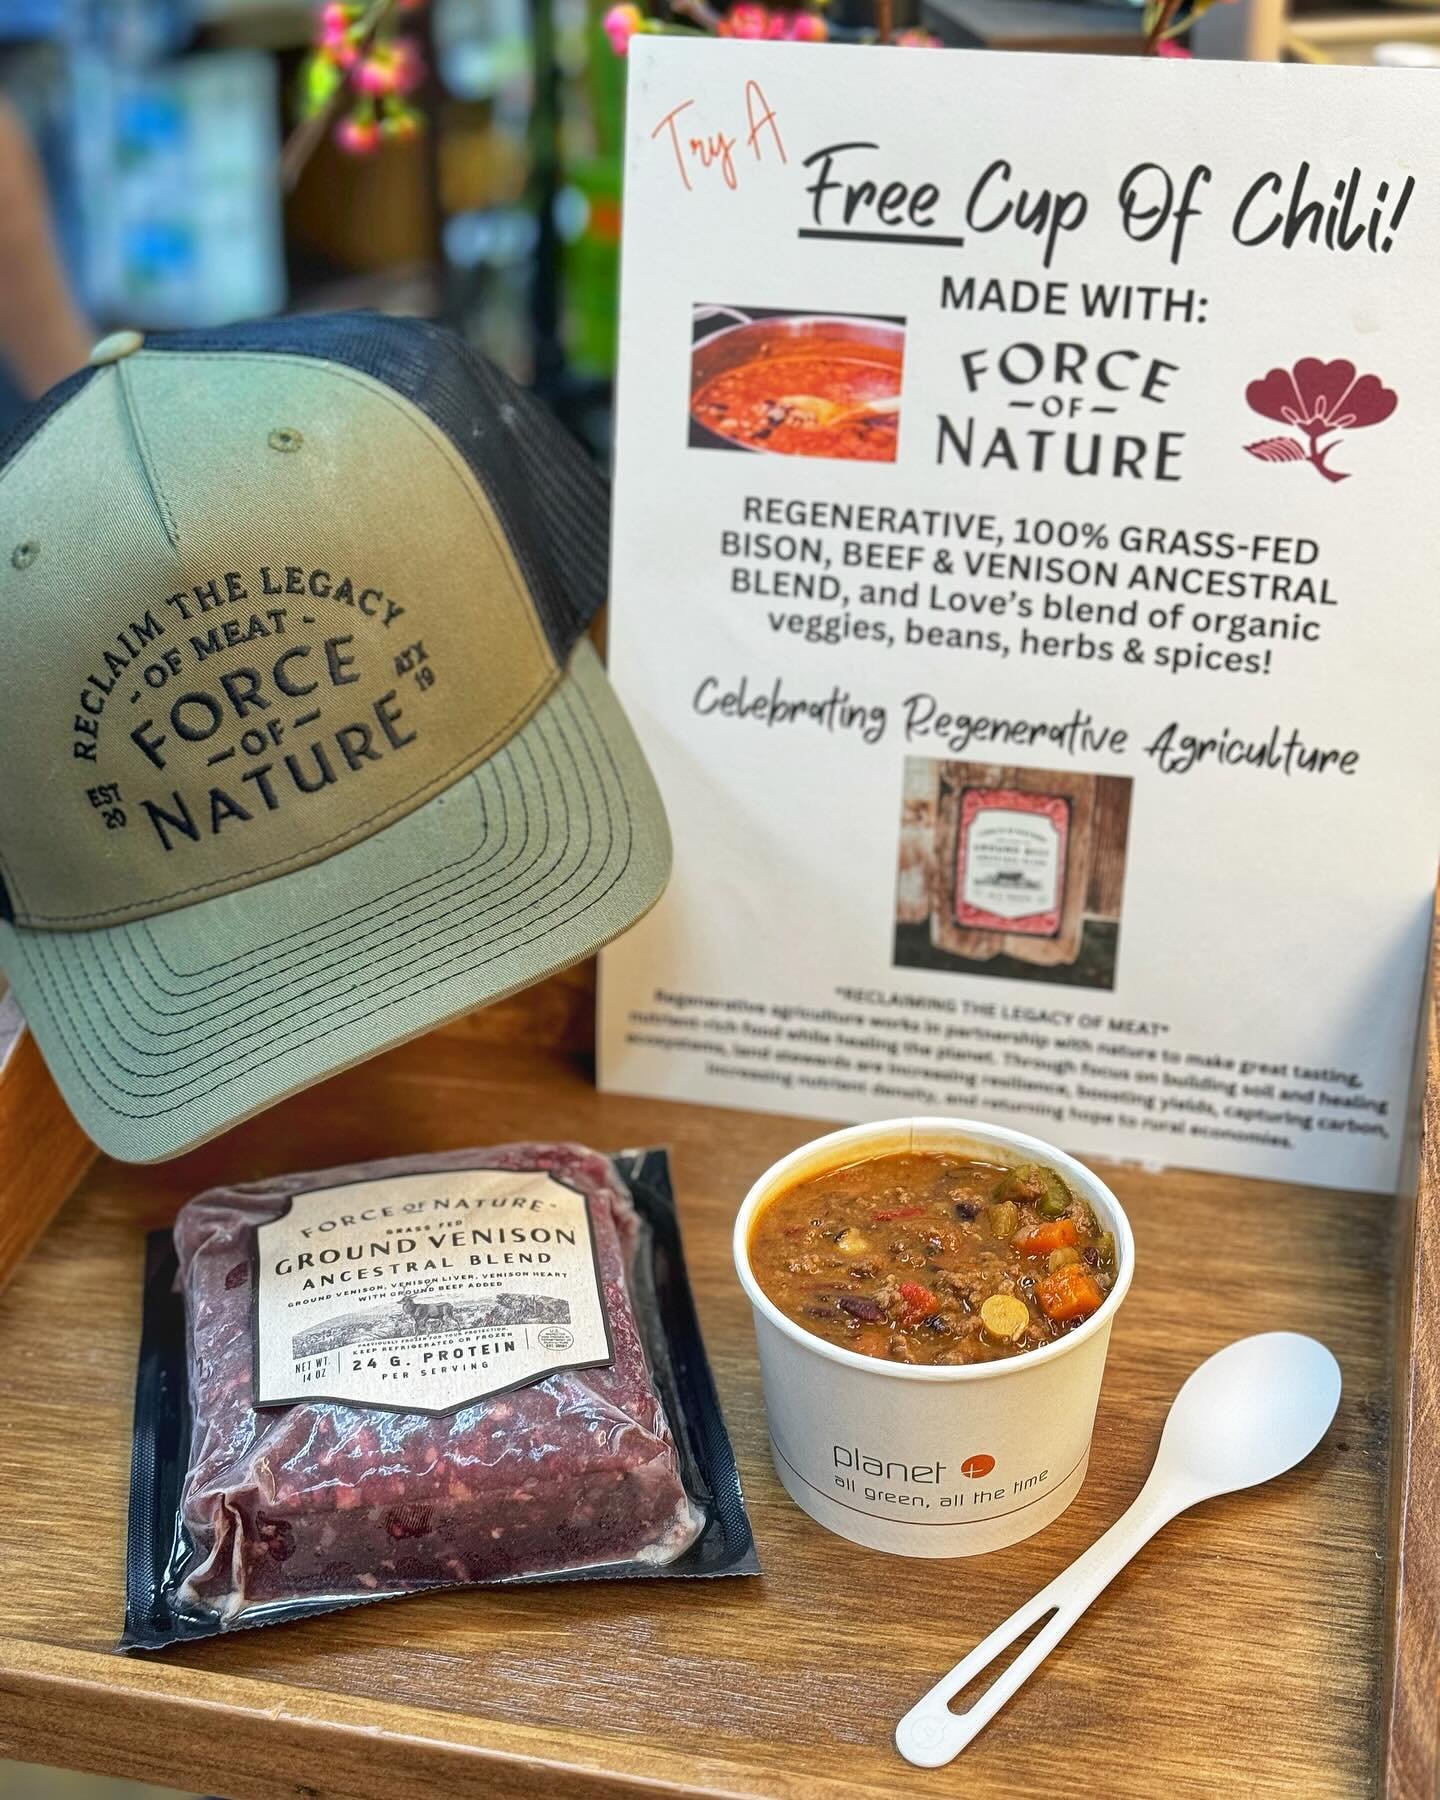 FREE CHILI GIVEAWAY this Saturday, April 27th! 🌶️ 🫘🥩

In honor of our Earth Month celebrations, @forceofnaturemeats supplied us with some of their grass-fed, pasture raised beef, bison and venison. 

Force of Nature focuses on regenerative agricul